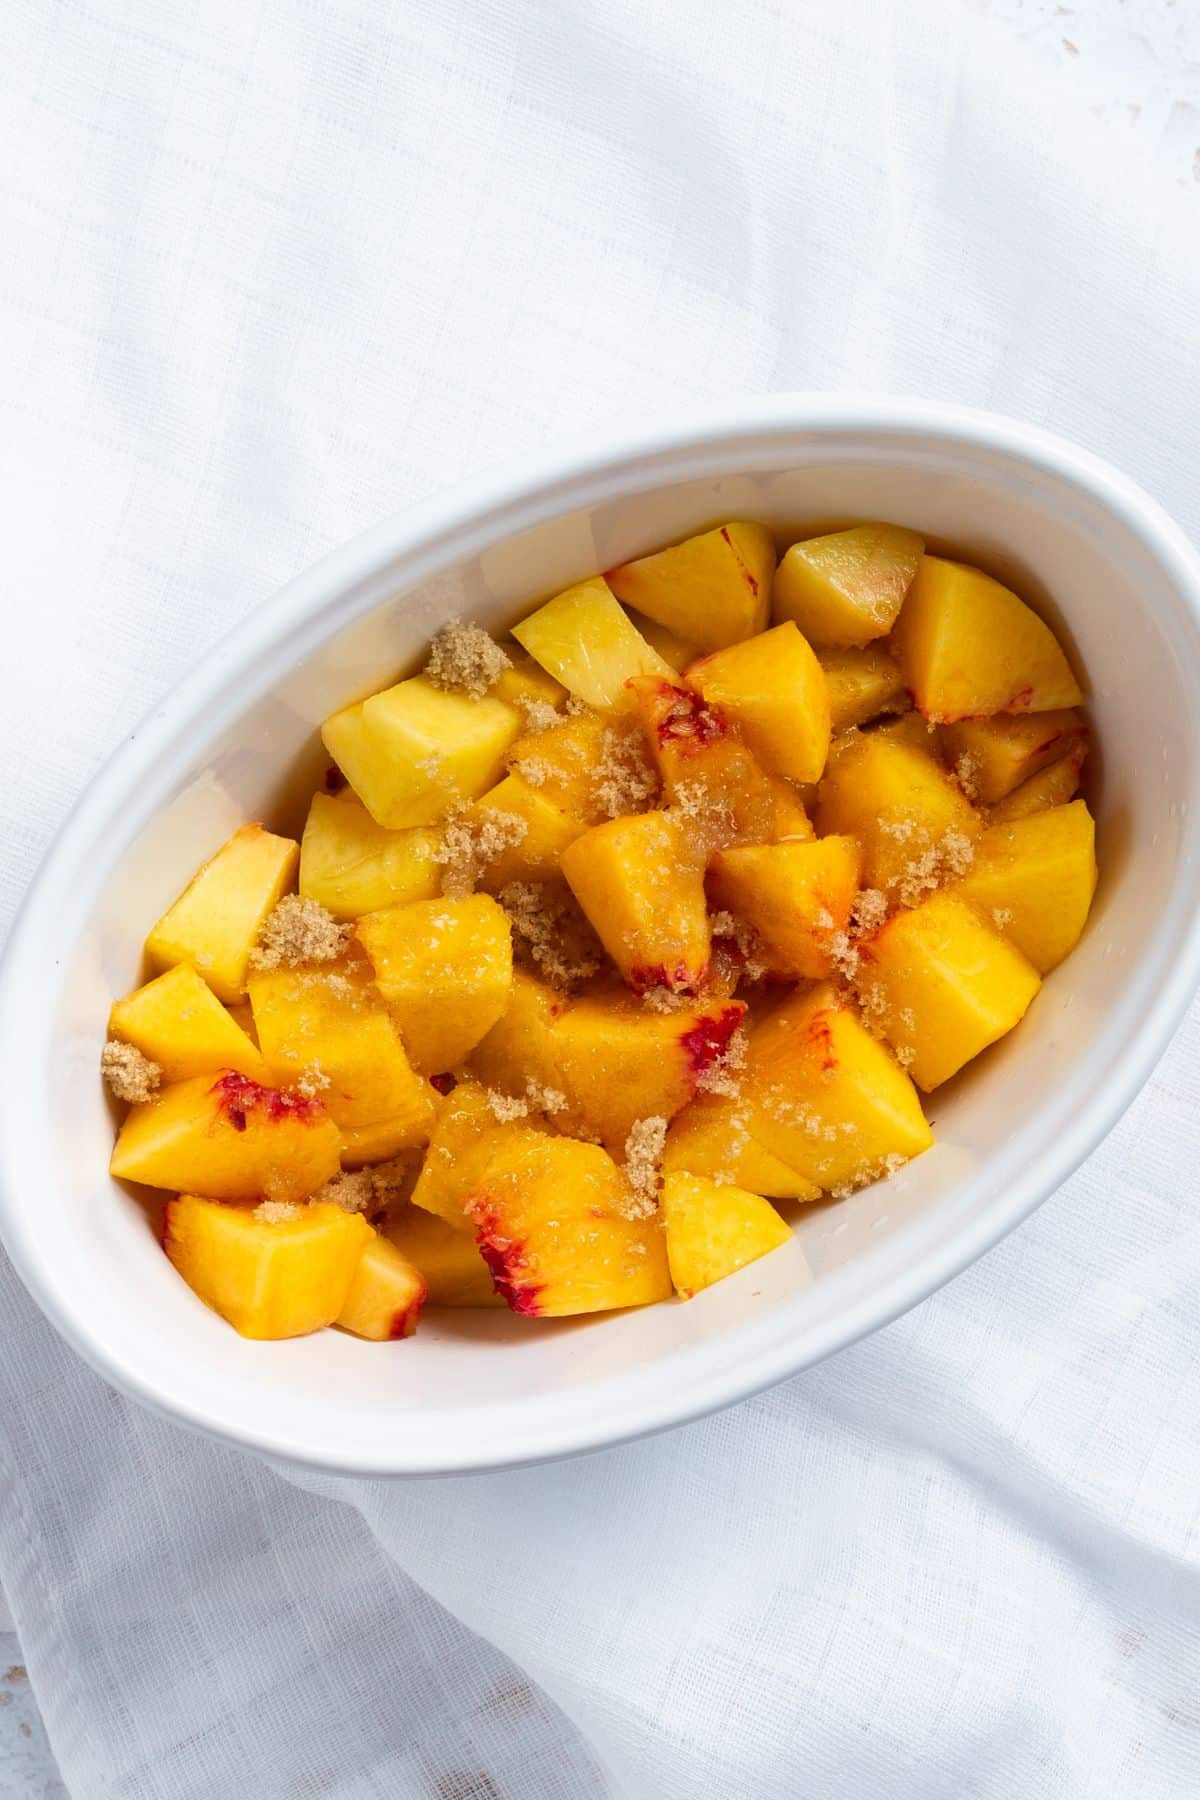 Sliced peaches in a small white baking dish for a peach cobbler for one.